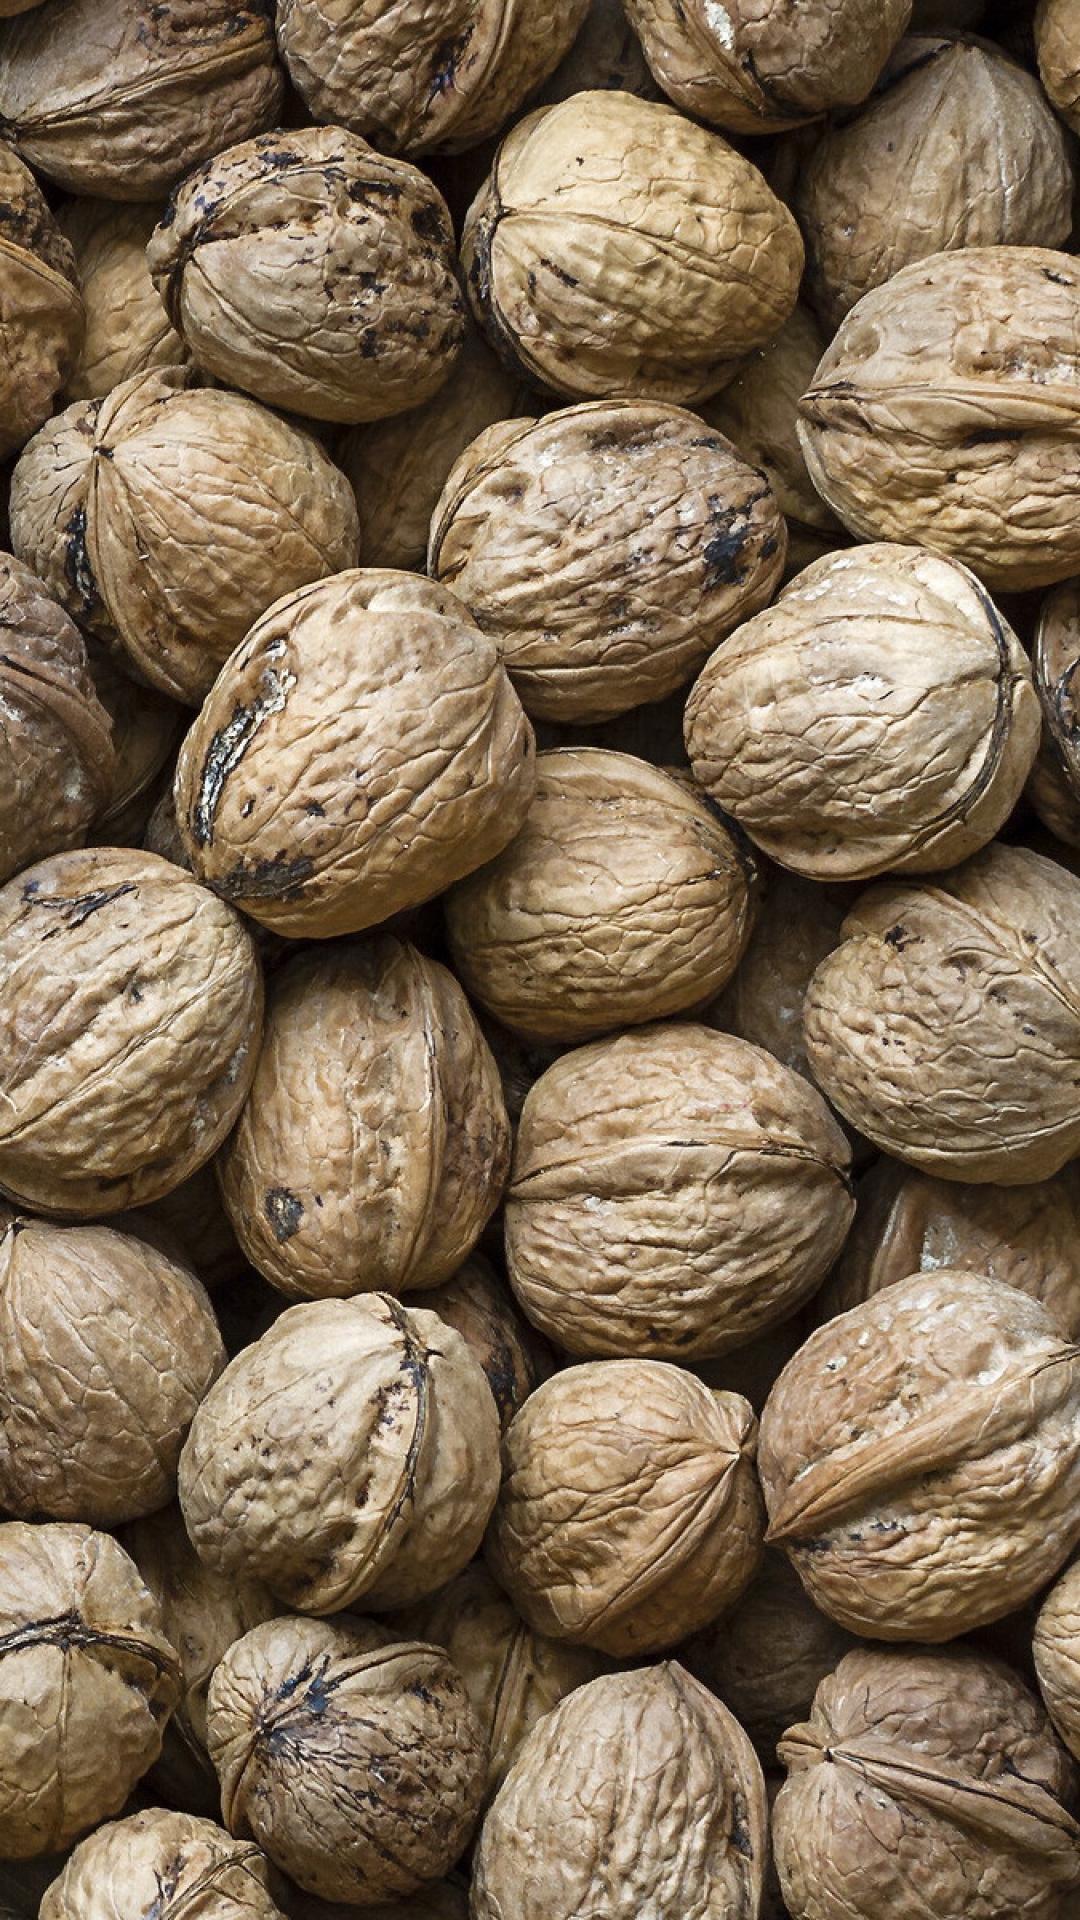 HD Background Walnuts Shelled Nuts Texture Dried Fruit Wallpaper